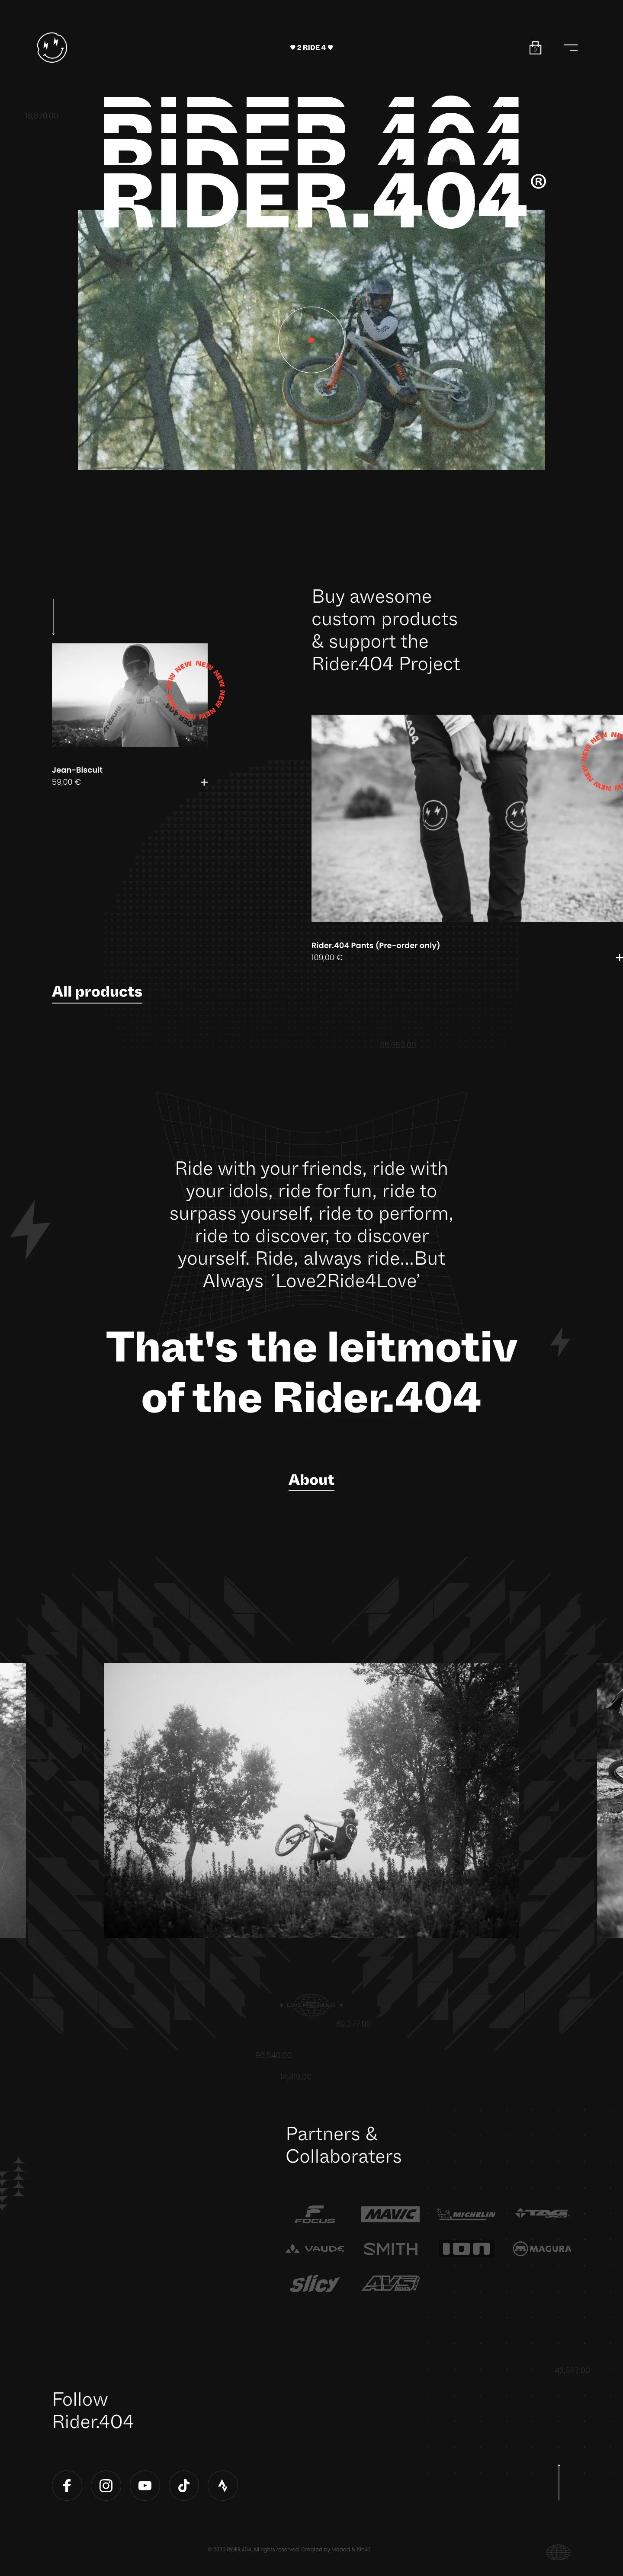 Rider.404 Landing Page Example: Ride with your friends, ride with your idols, ride for fun, ride to surpass yourself, ride to perform, to discover, ride to discover yourself. Ride, always ride.